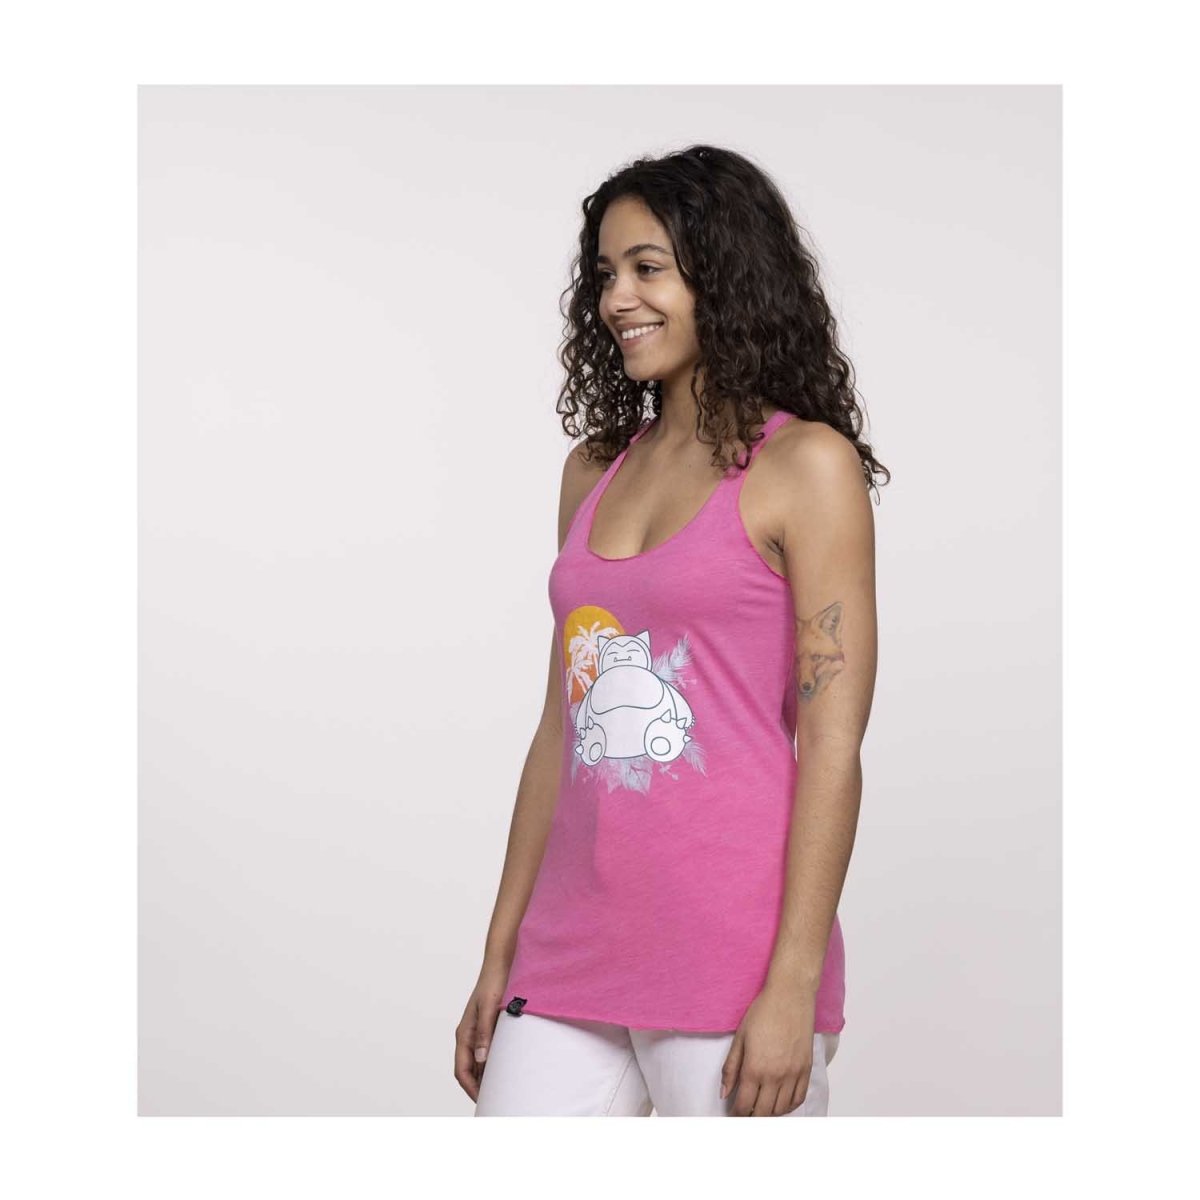 Snorlax Sunset Pink Fitted Racerback Tank Top - Women